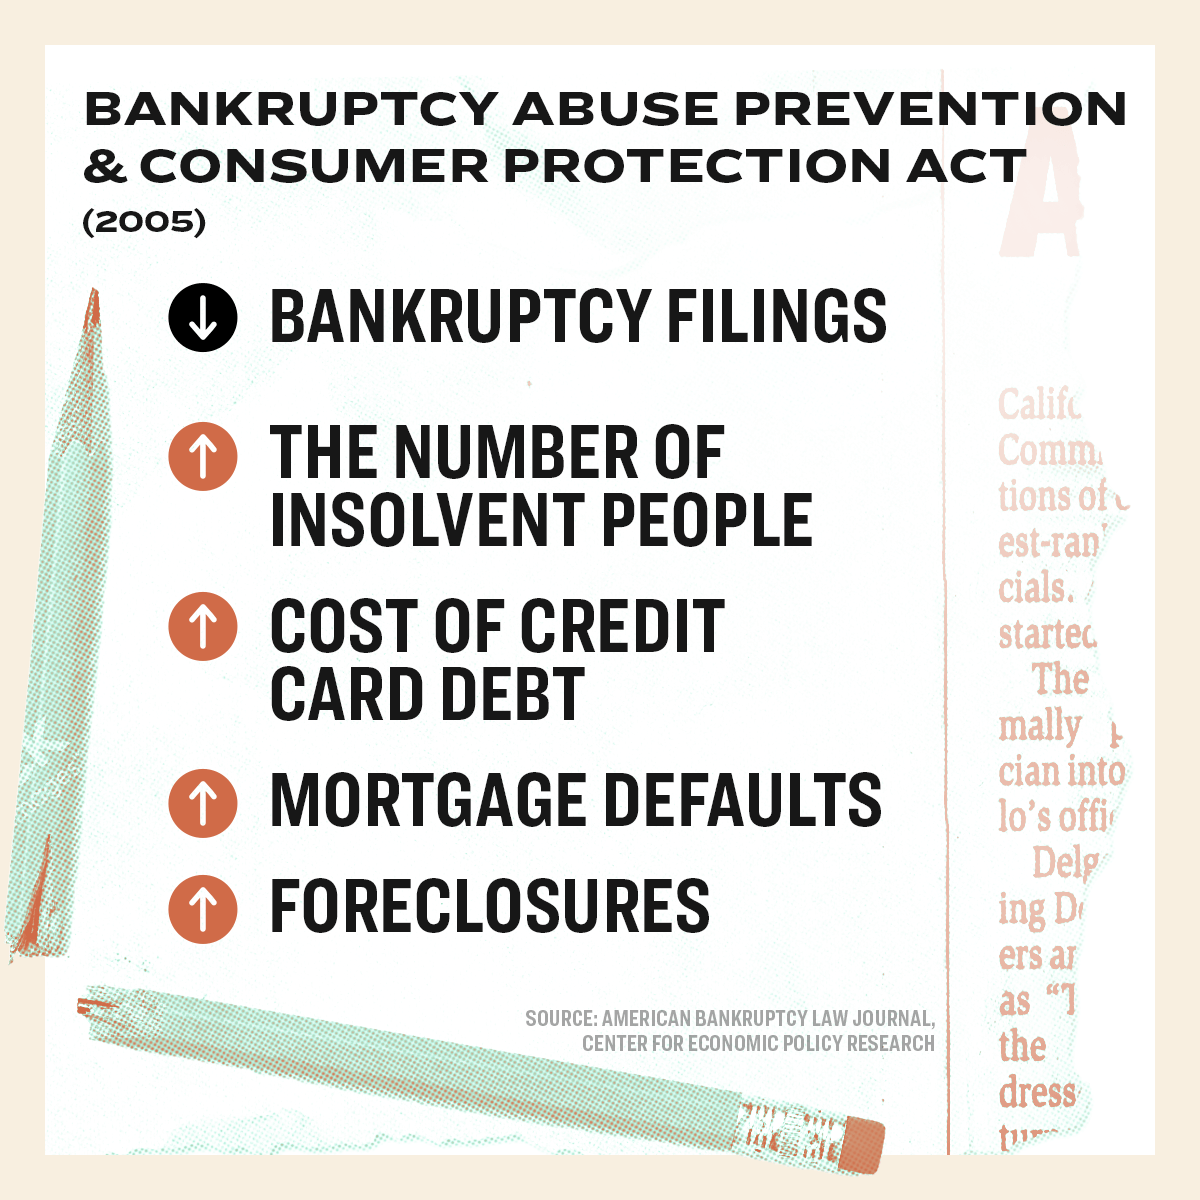 Bankruptcy Abuse Prevention and Consumer Protection Act (2005)

Bankruptcy filings are down

The number of insolvent people are up
Cost of credit card debt are up
Mortgage defaults are up
Foreclosures are up

Source: American Bankruptcy Law Journal, Center for Economic Policy Research
